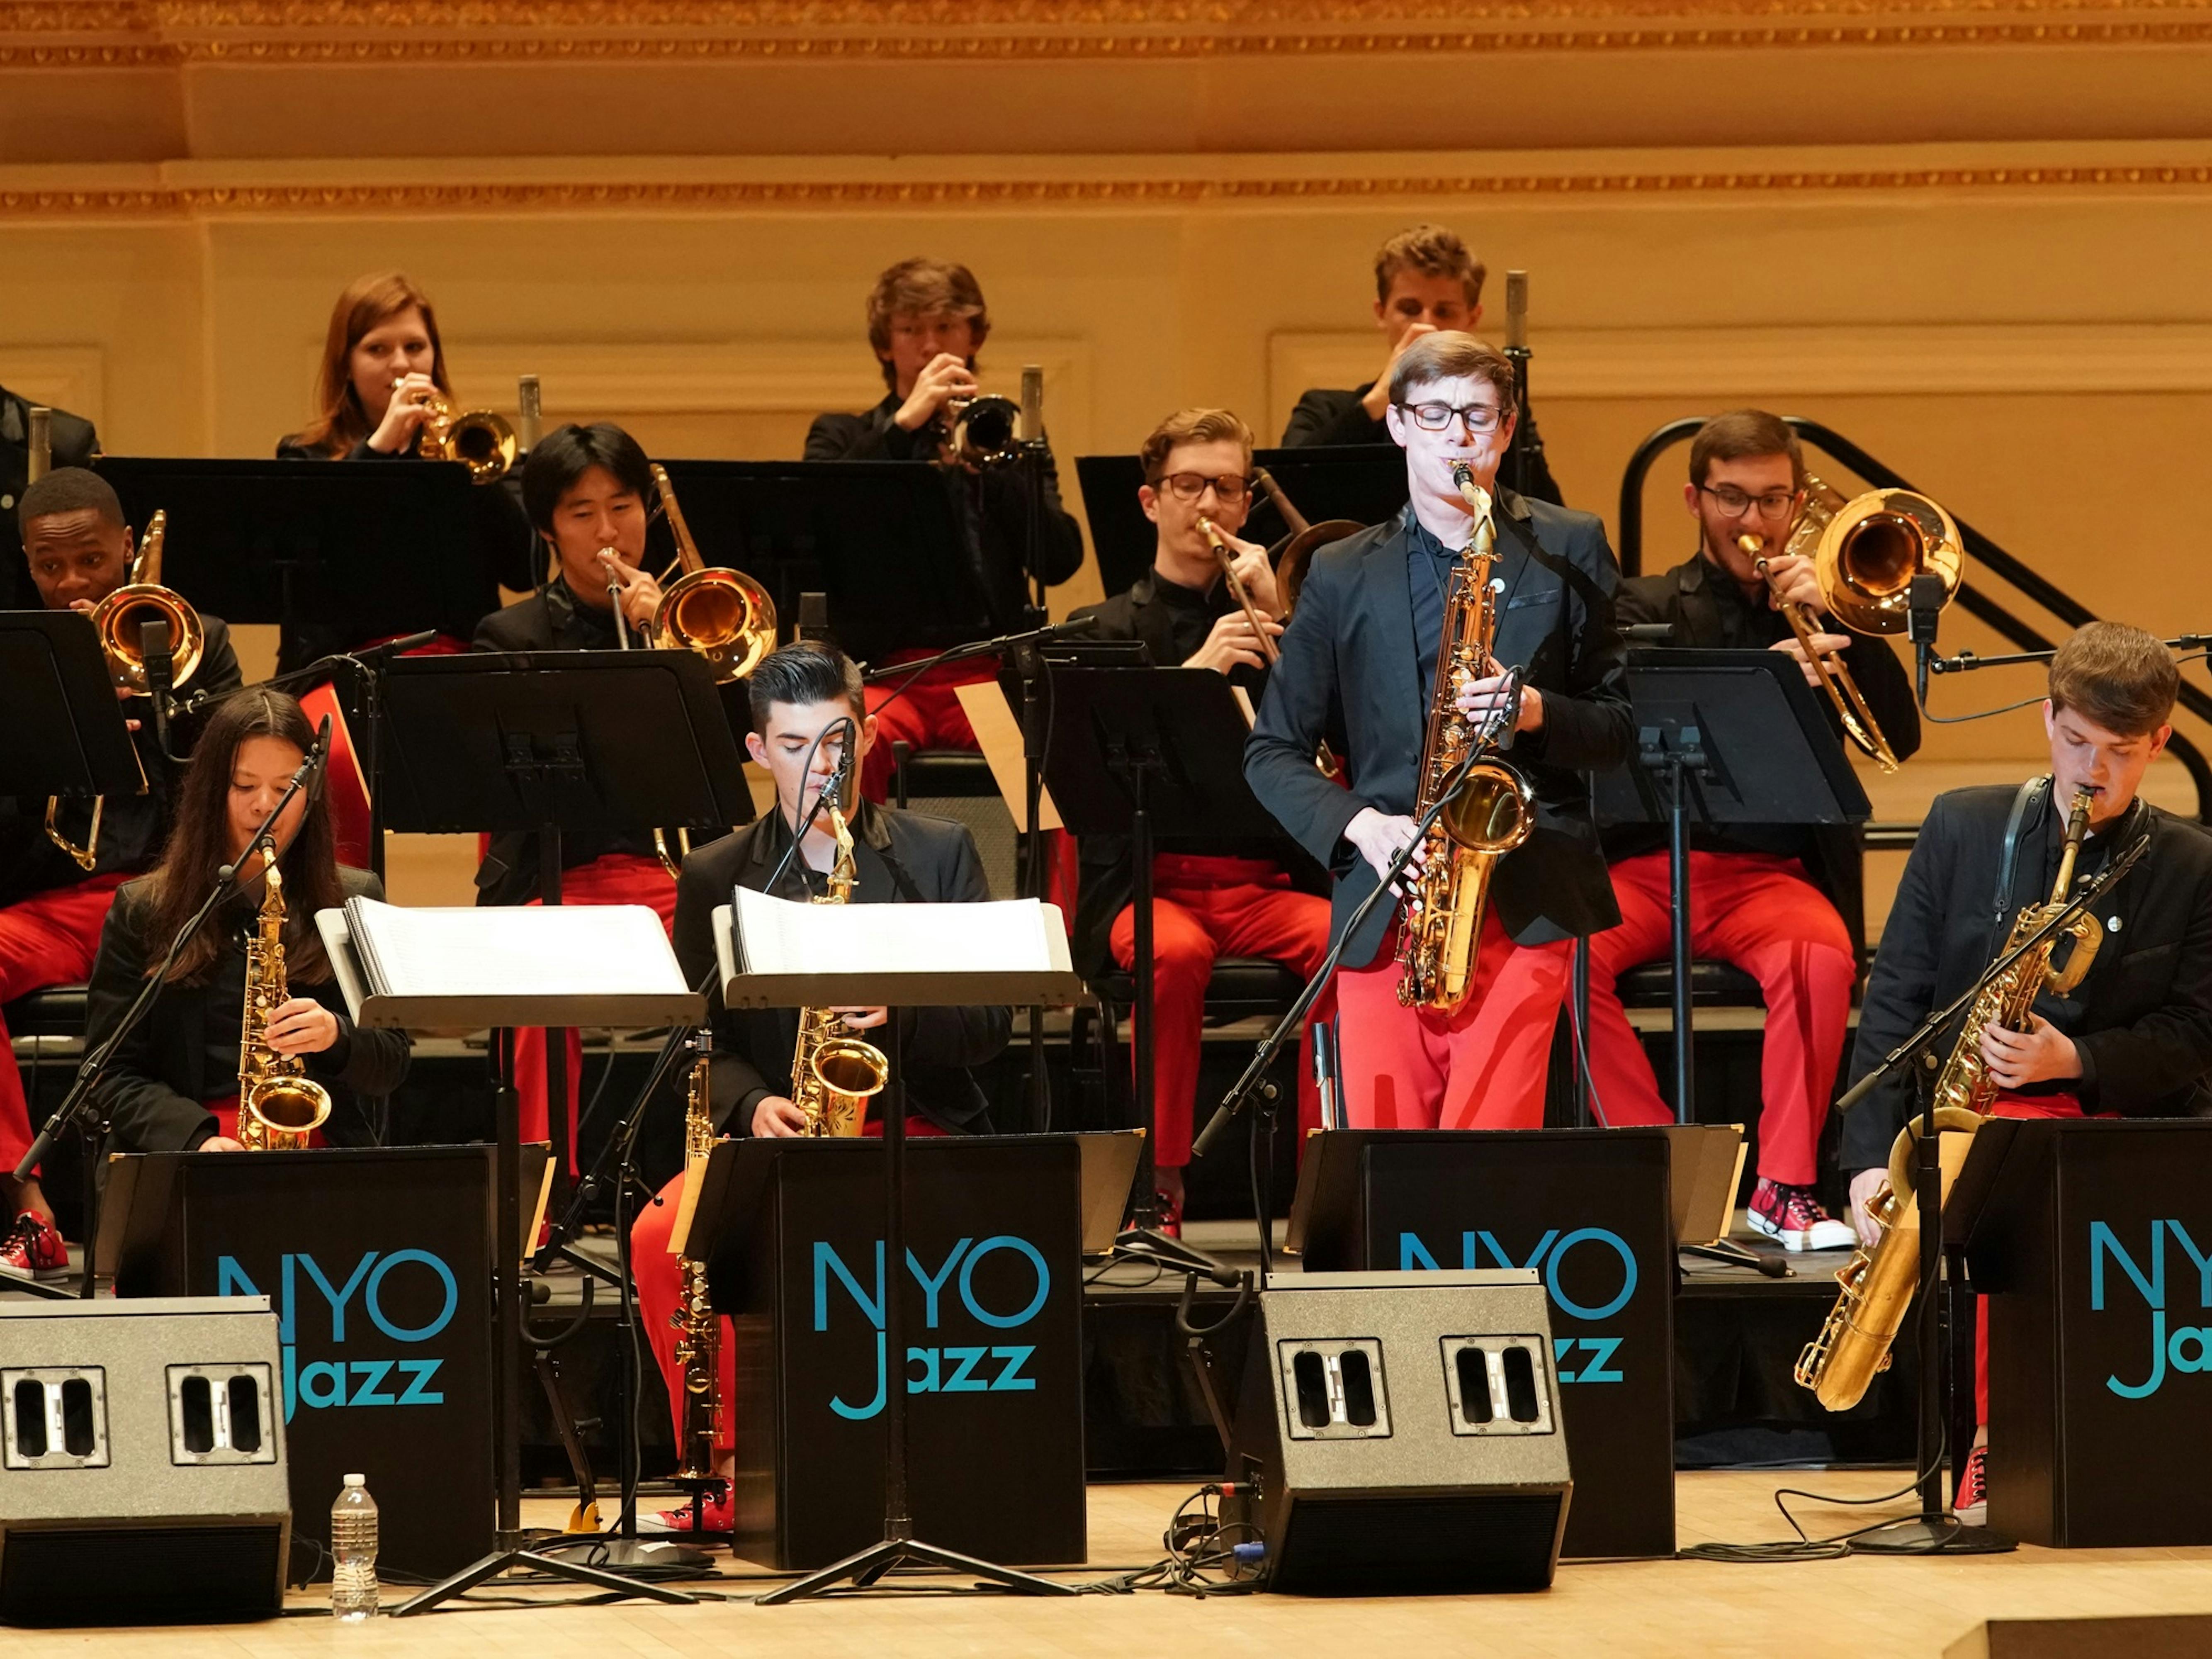 Members of NYO Jazz perform in Isaac Stern Auditorium / Perelman Stage